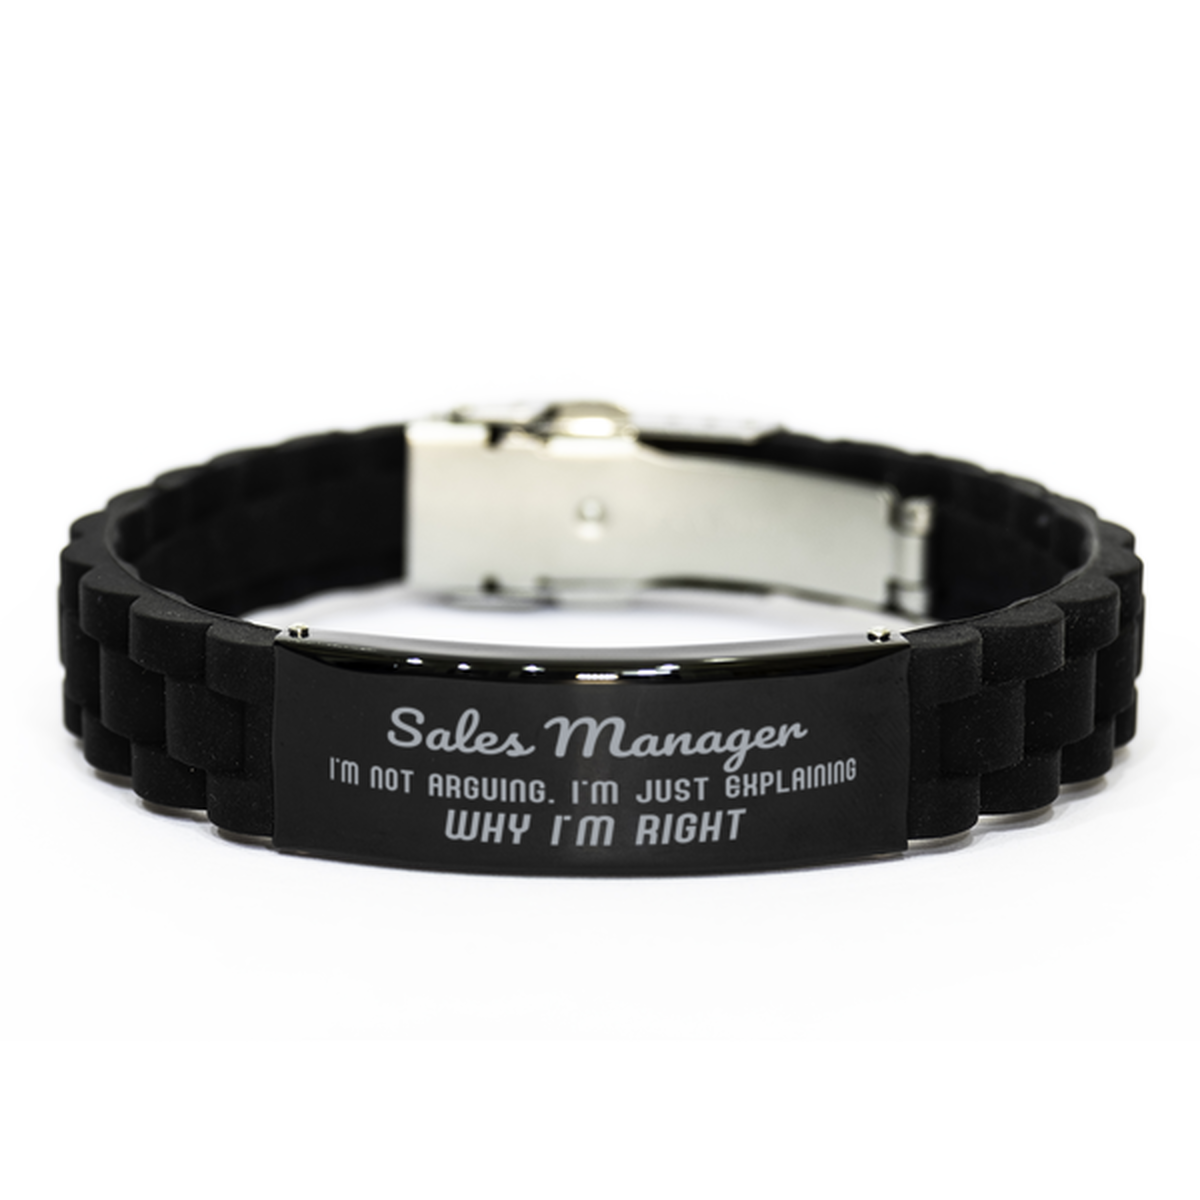 Sales Manager I'm not Arguing. I'm Just Explaining Why I'm RIGHT Black Glidelock Clasp Bracelet, Funny Saying Quote Sales Manager Gifts For Sales Manager Graduation Birthday Christmas Gifts for Men Women Coworker